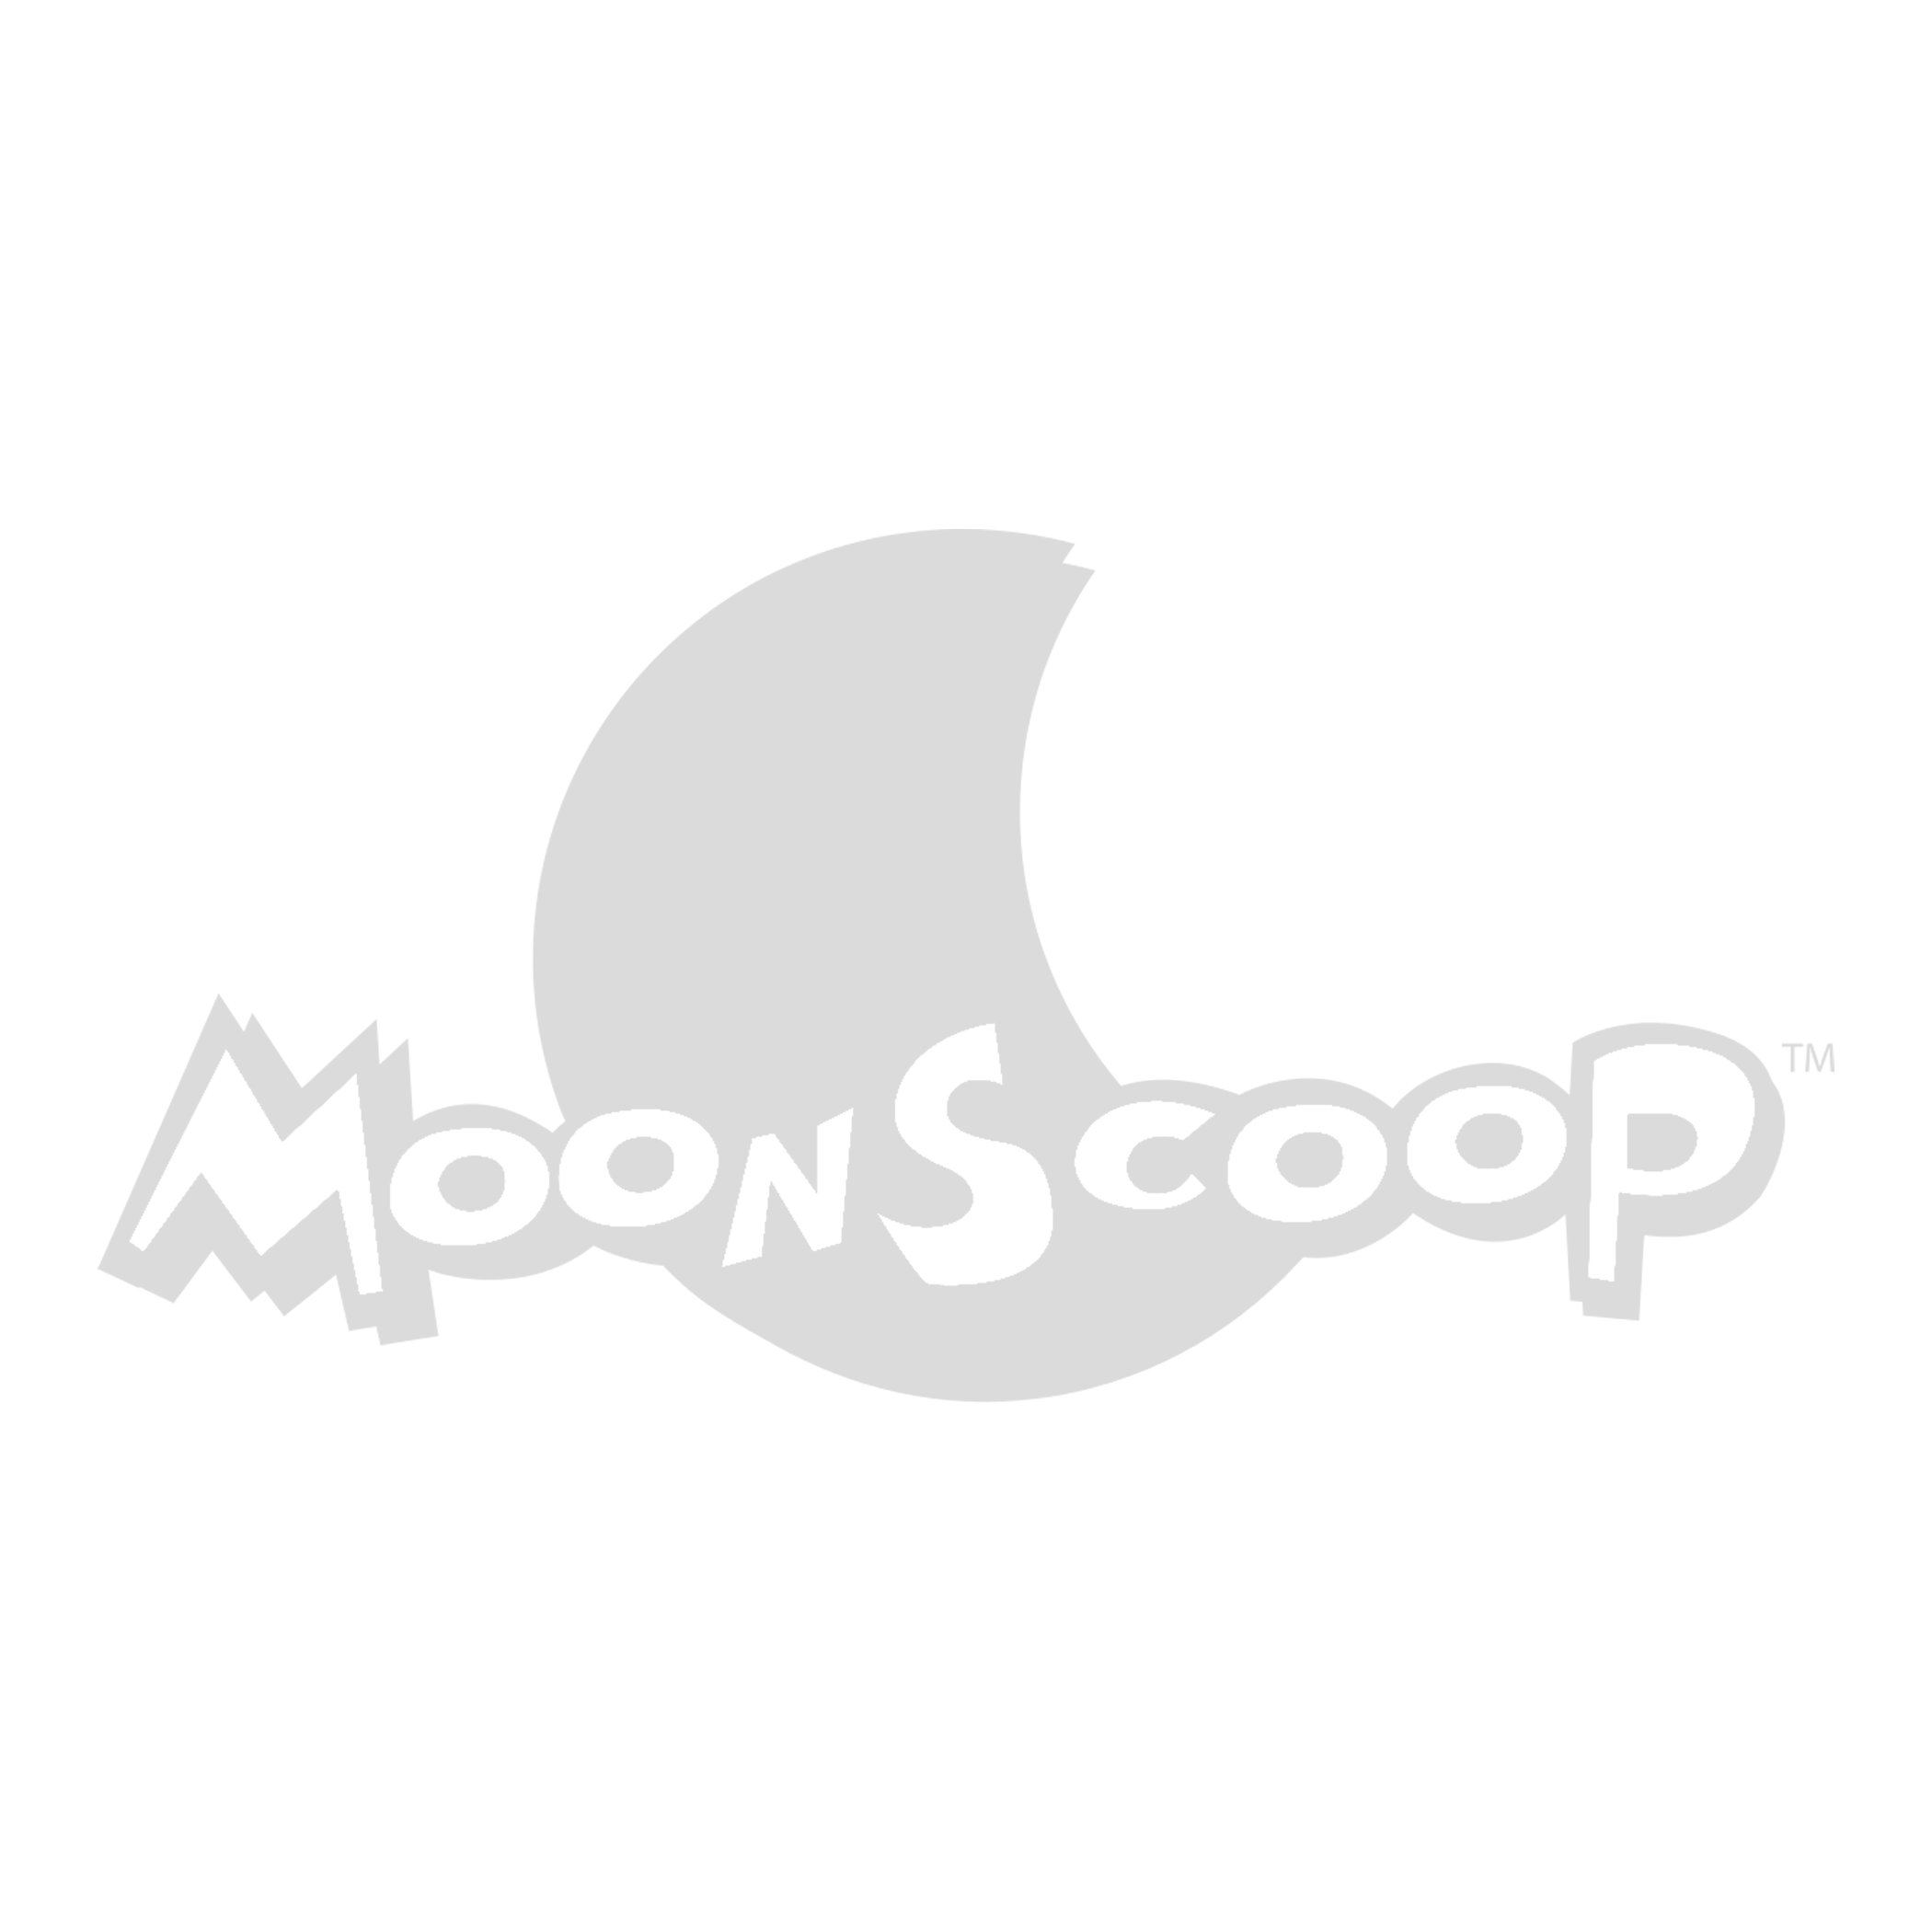 MOONSCOOPE_GRAY.png